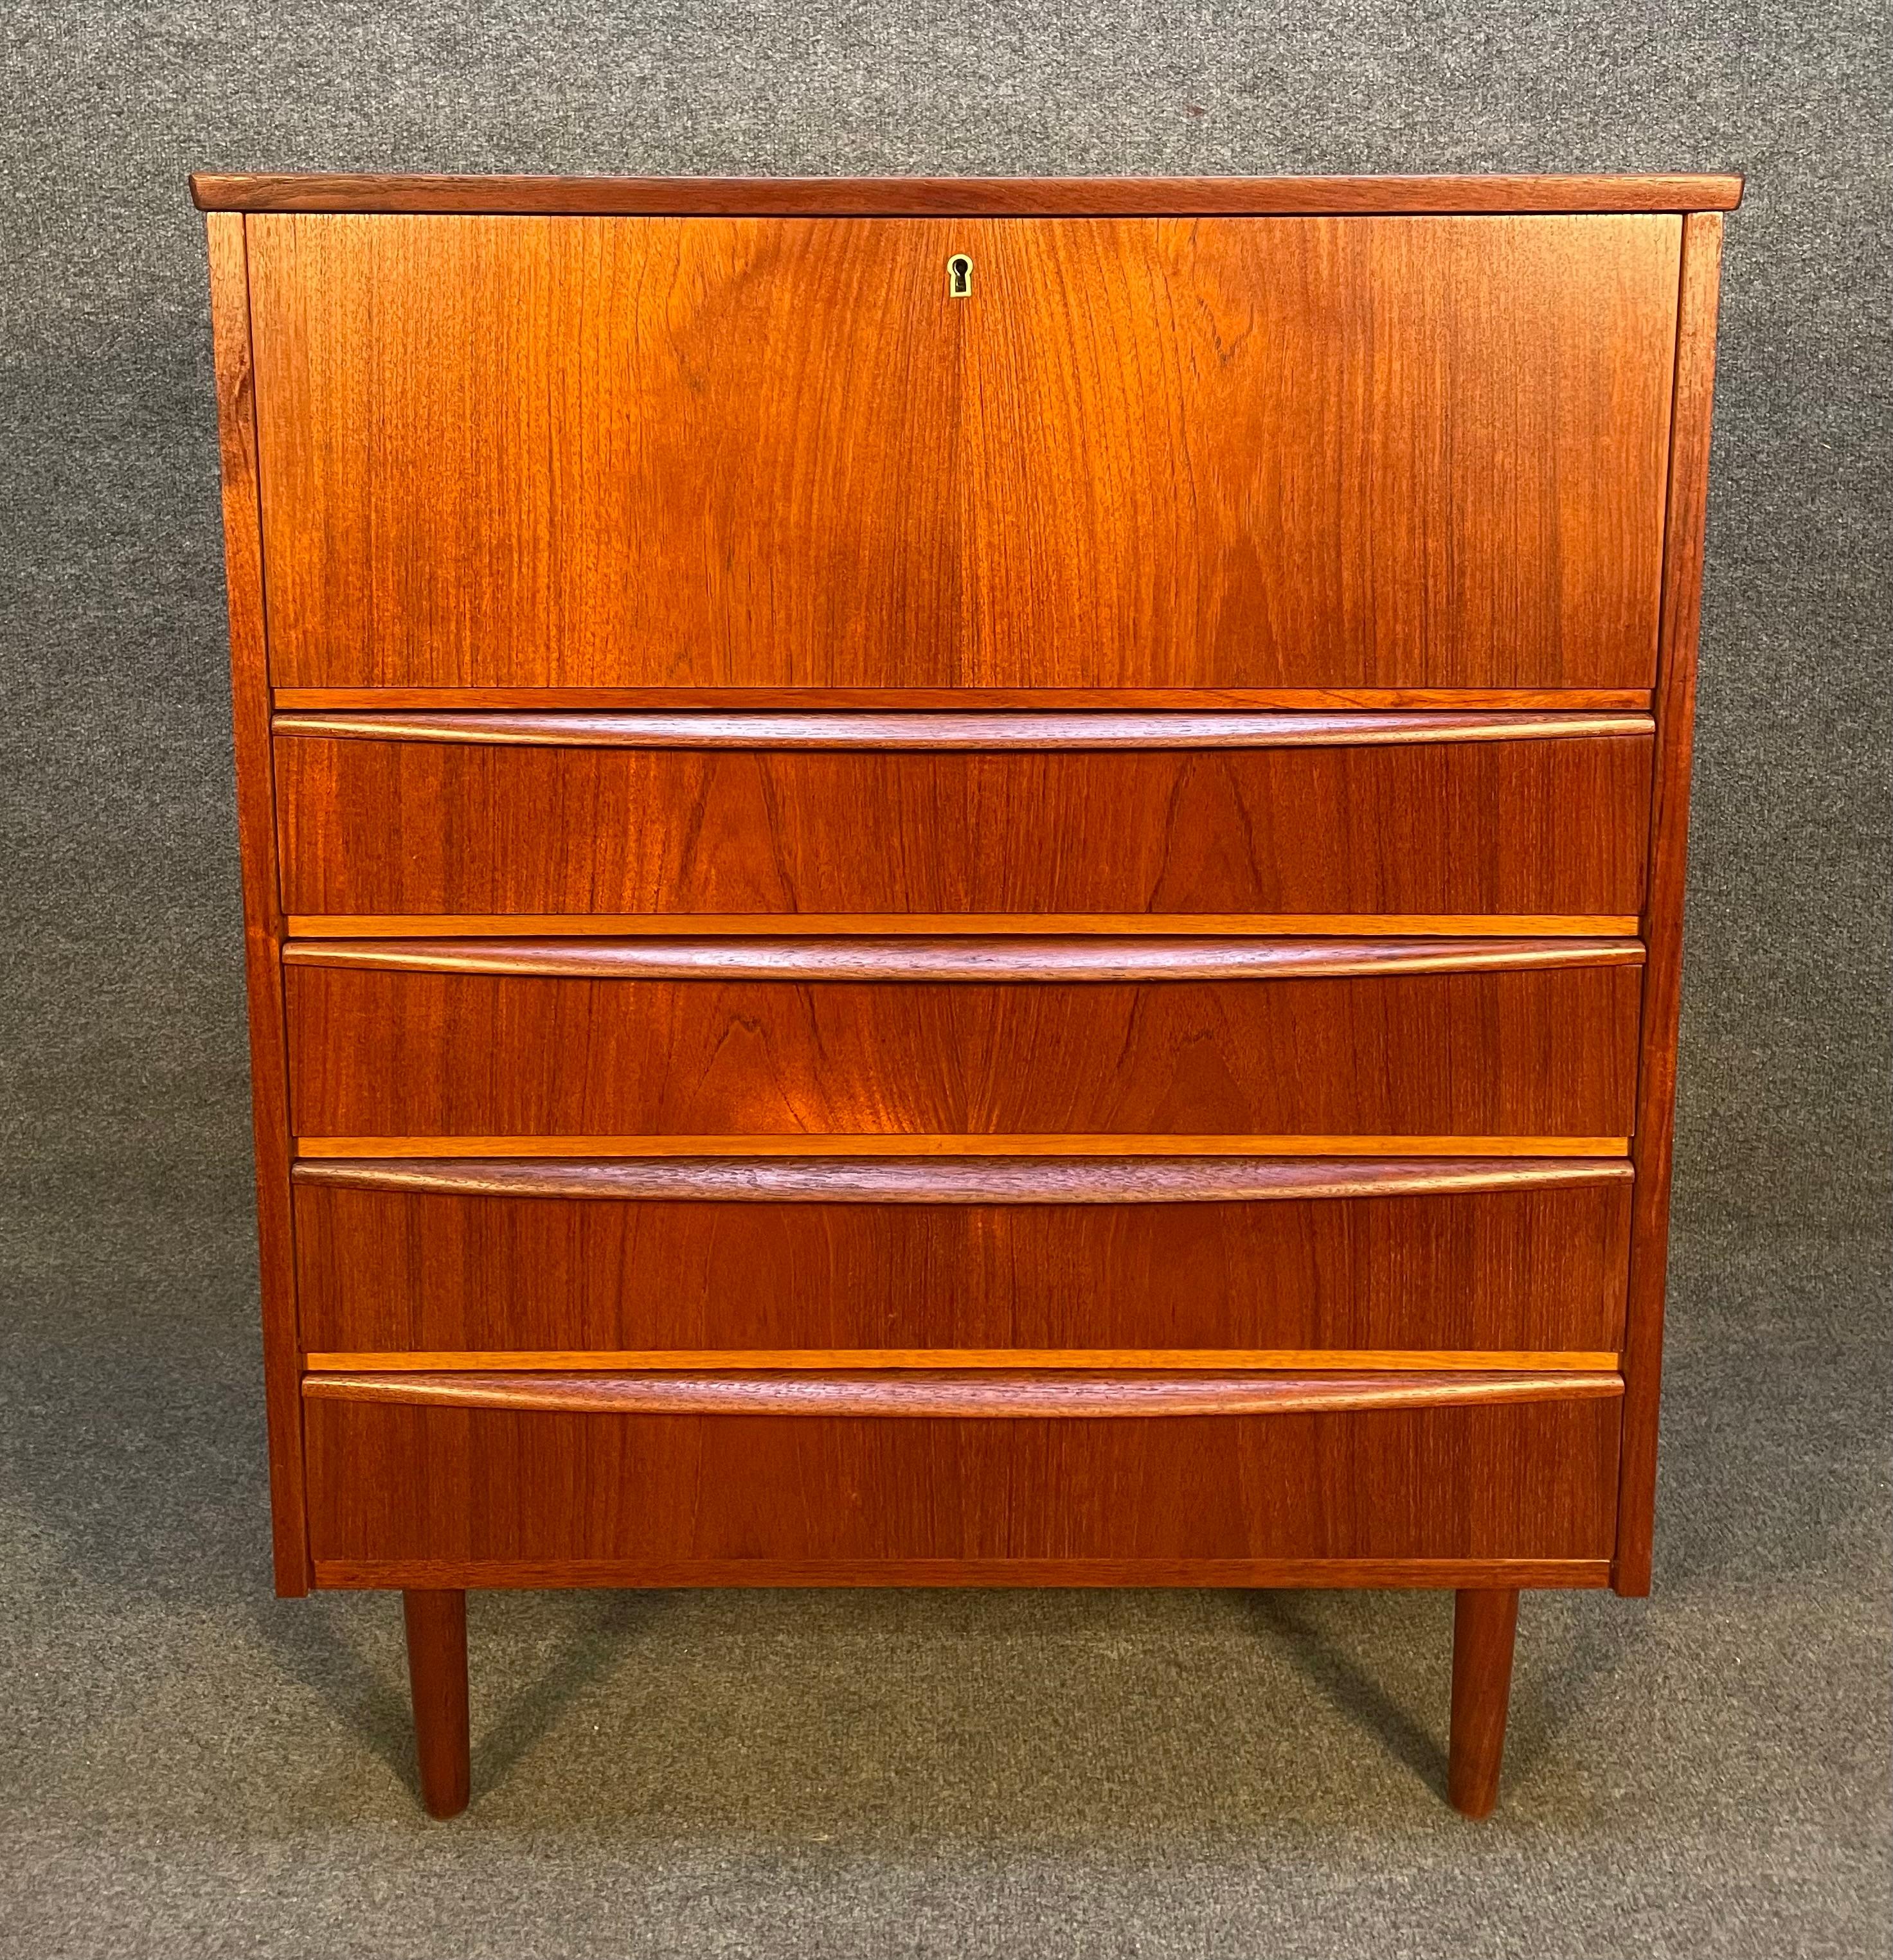 Here is a beautiful Scandinavian modern tall boy dresser - vanity in teak wood manufactured in Denmark in the 1960's.
This versatile piece, recently imported from Europe ton California before its refinishing, features a vibrant wood grain, four